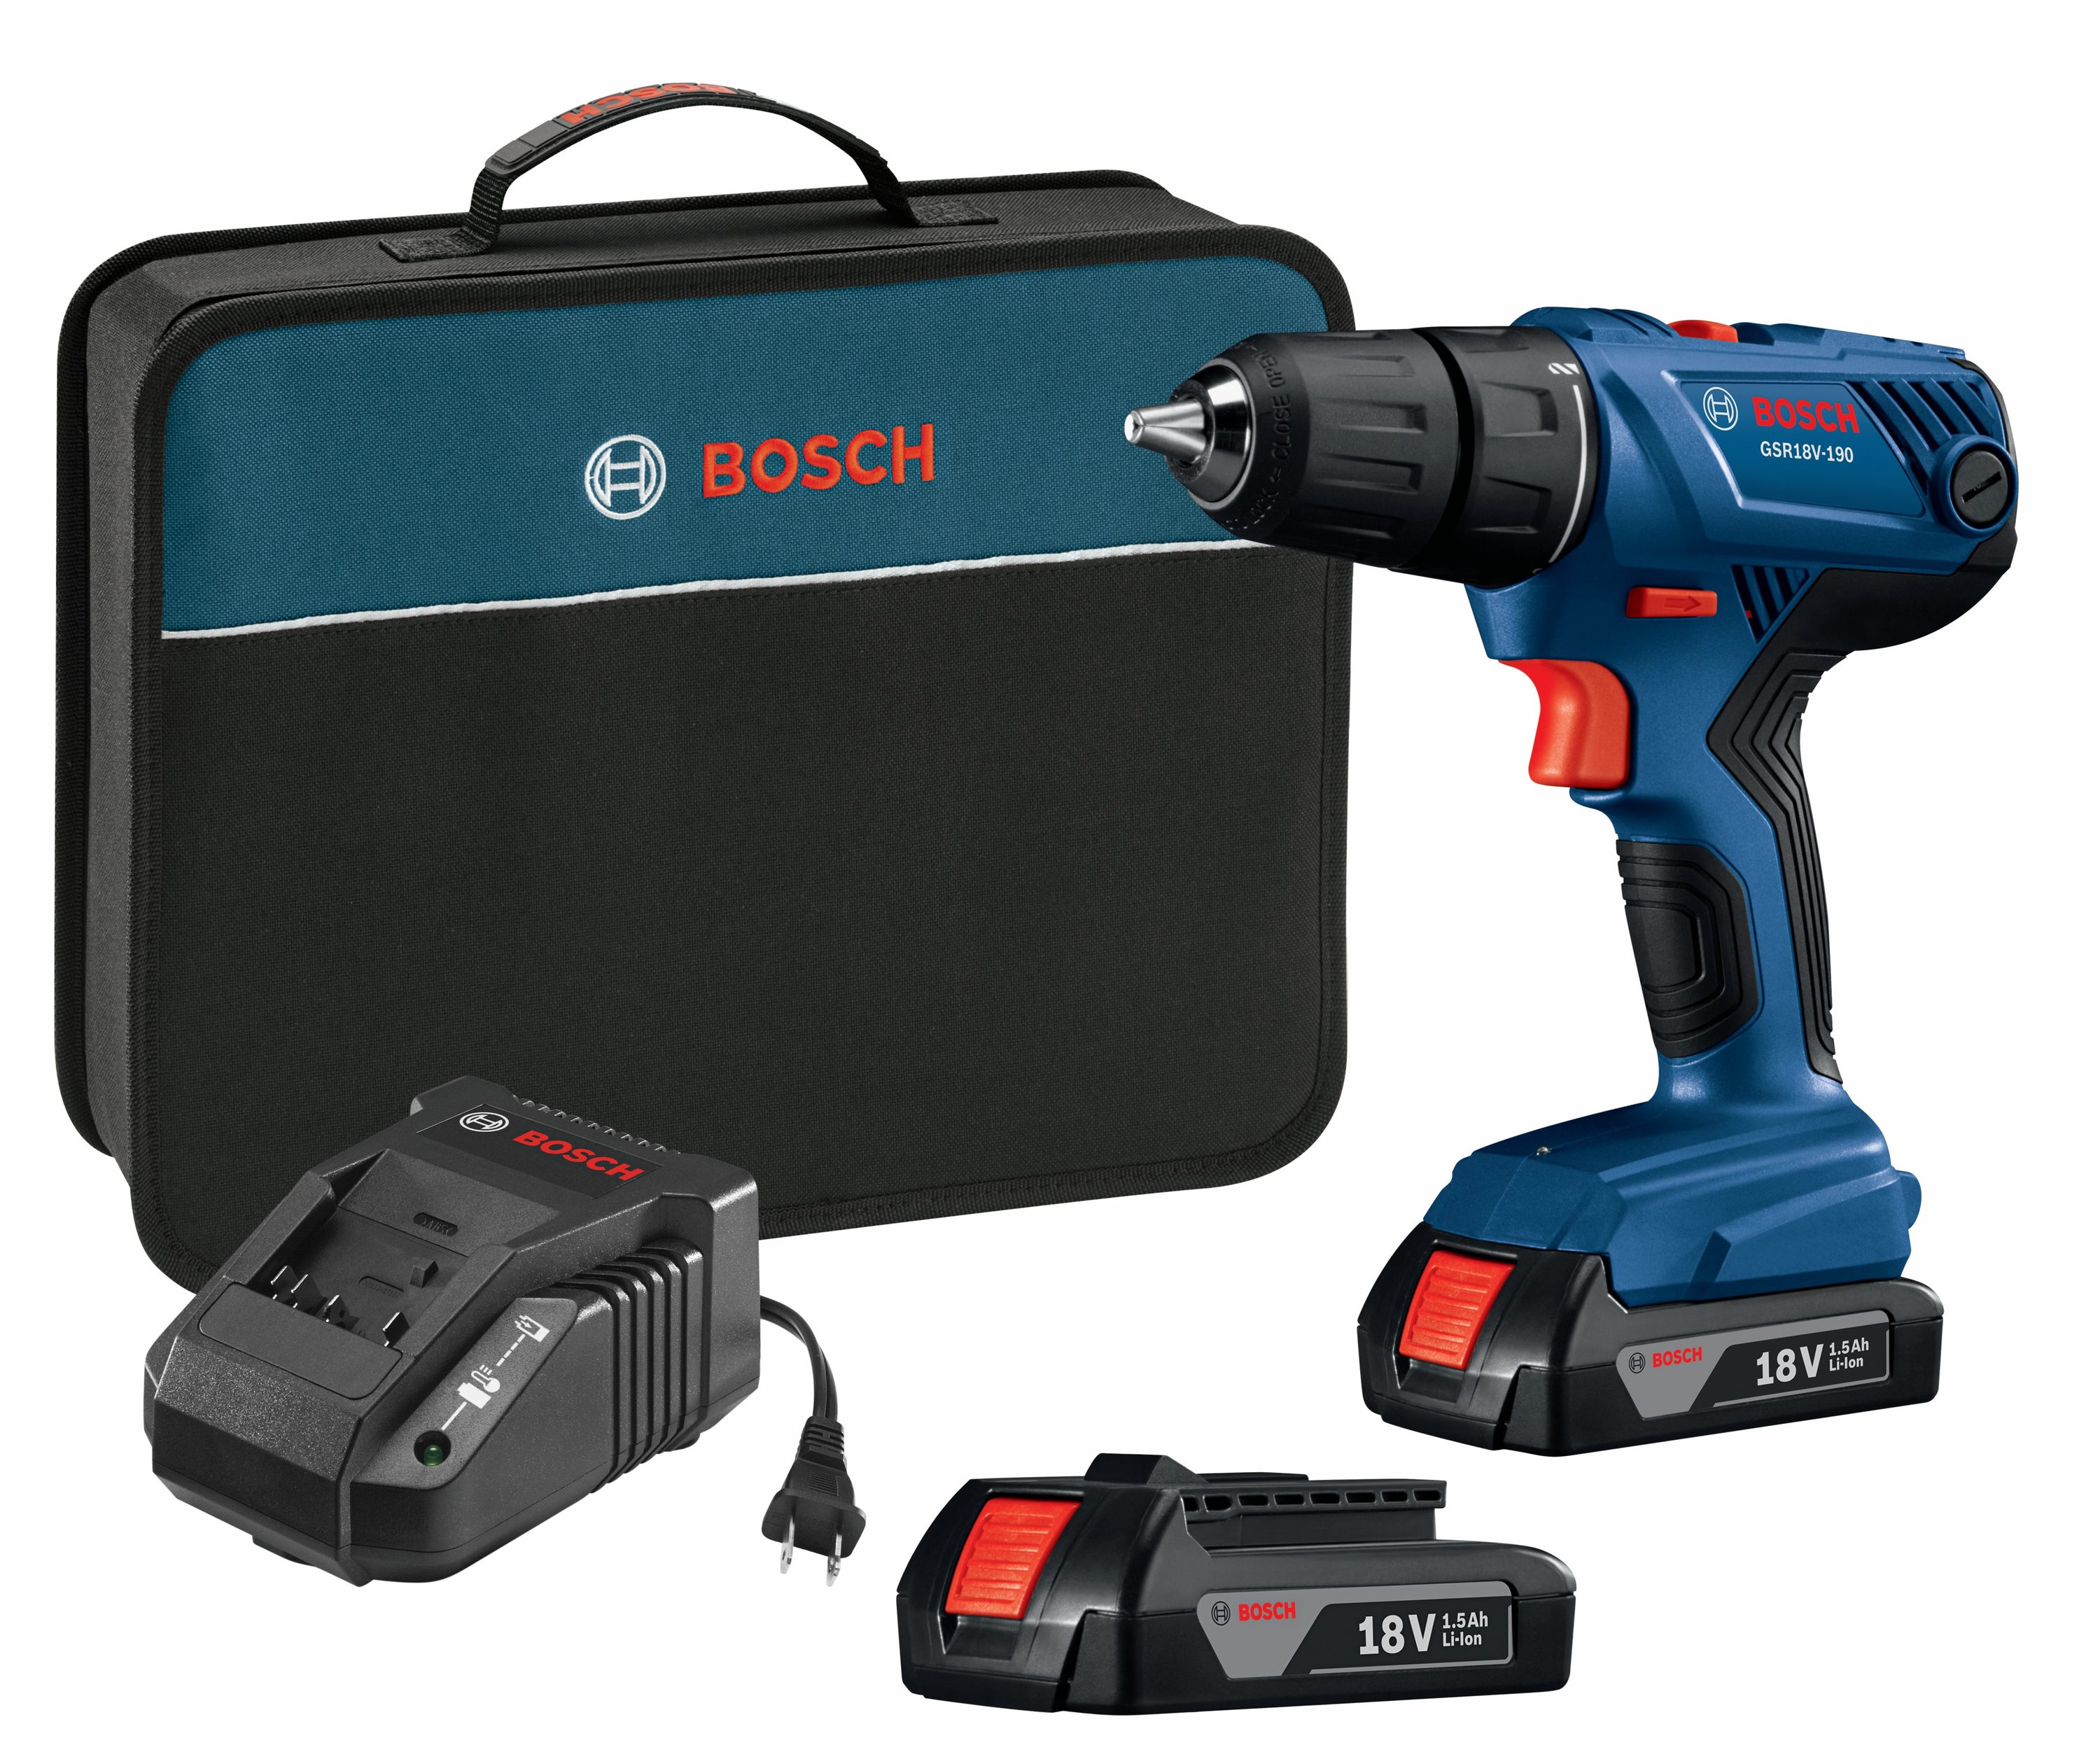 fascisme Nog steeds Verbazing Bosch 18-volt 1/2-in Cordless Drill (2 Li-ion Batteries Included and  Charger Included) in the Drills department at Lowes.com